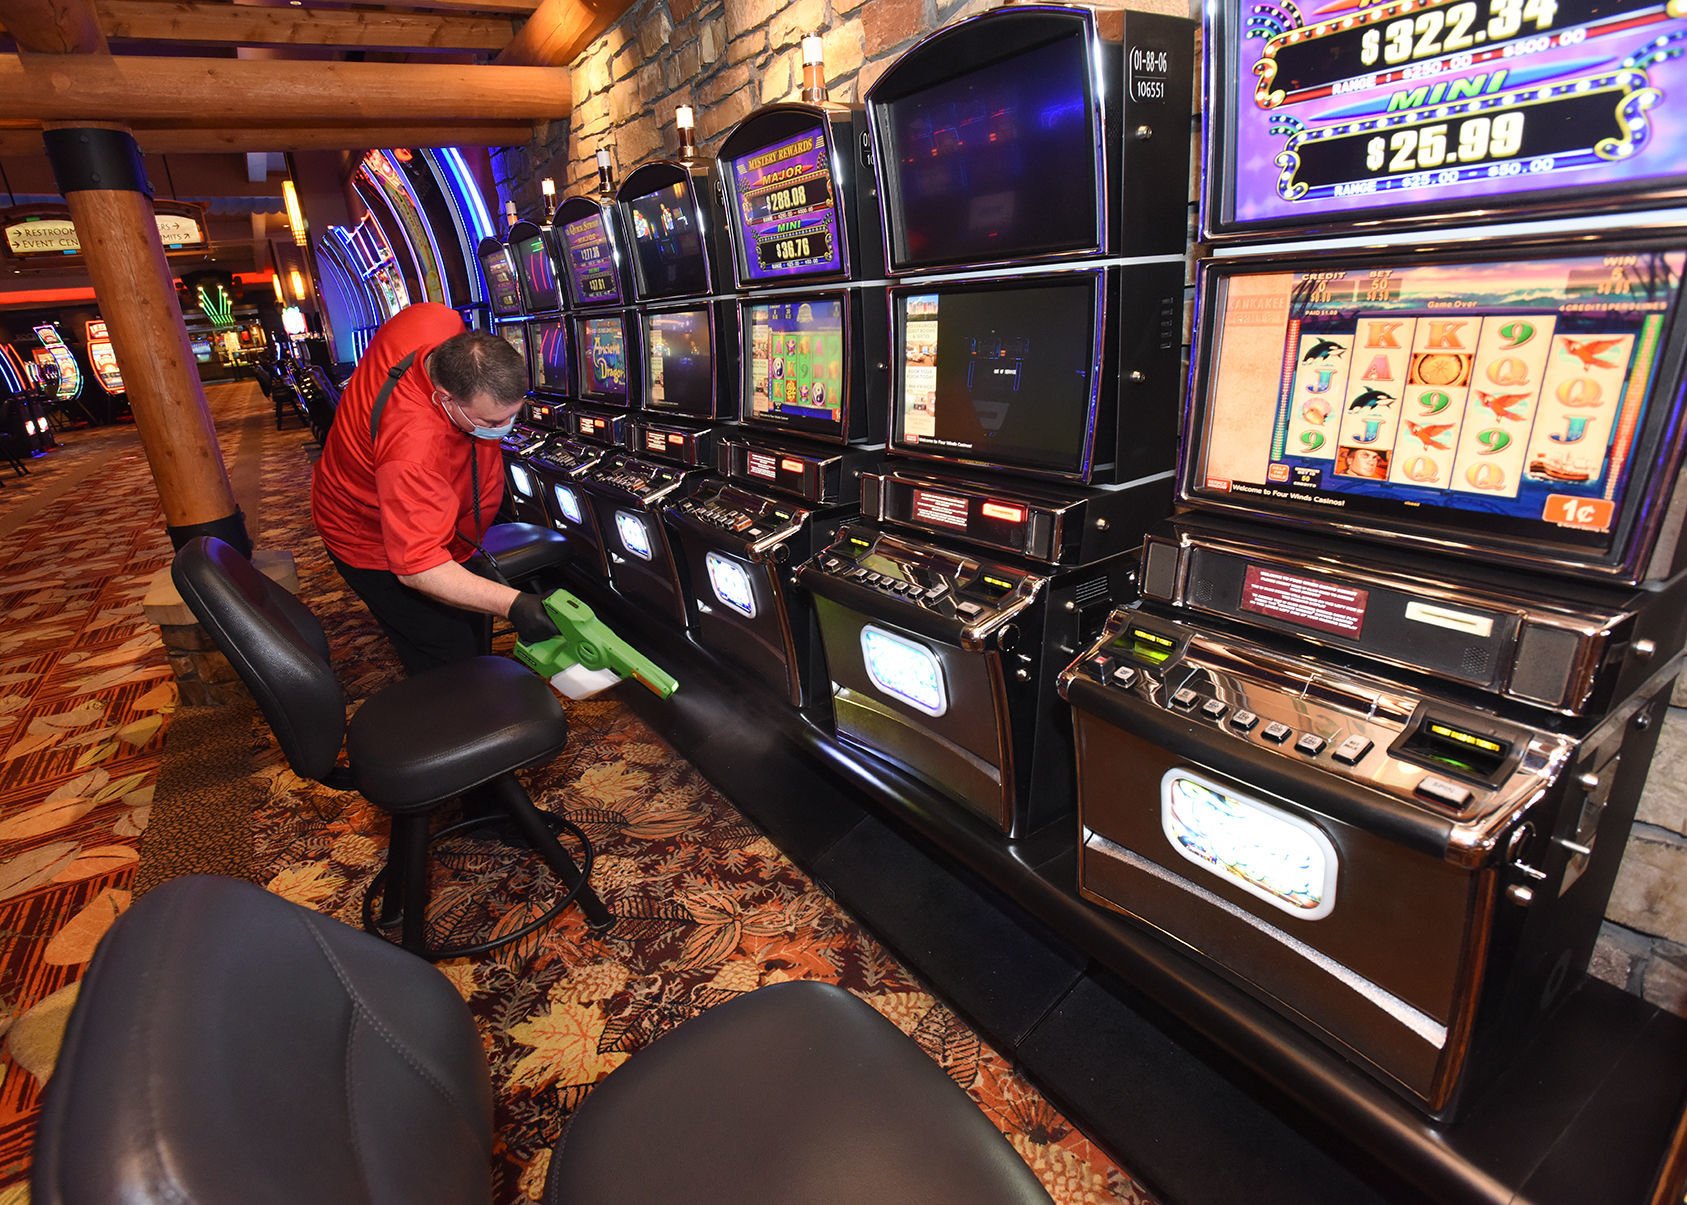 four winds casino human resources phone number